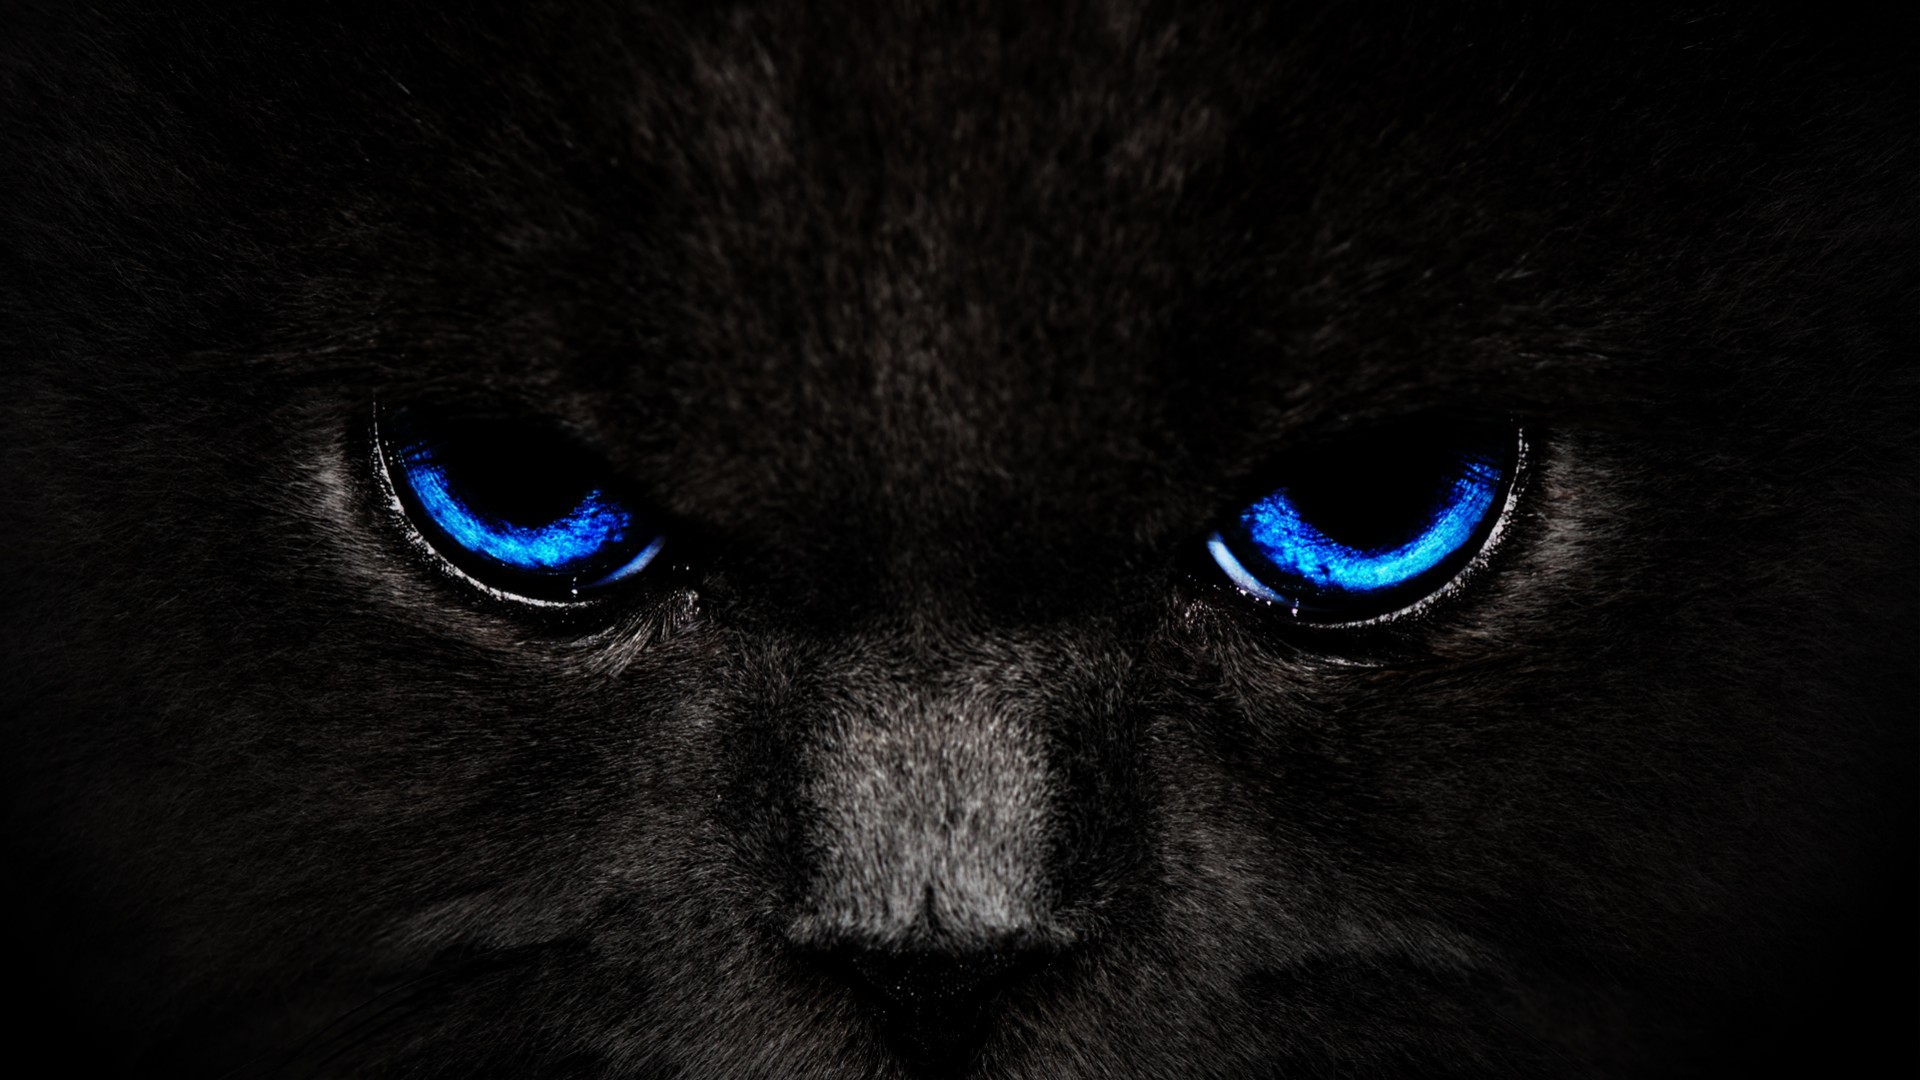 1920x1080 hd black cat wallpapers smart phone background photos download free images  widescreen desktop backgrounds high quality